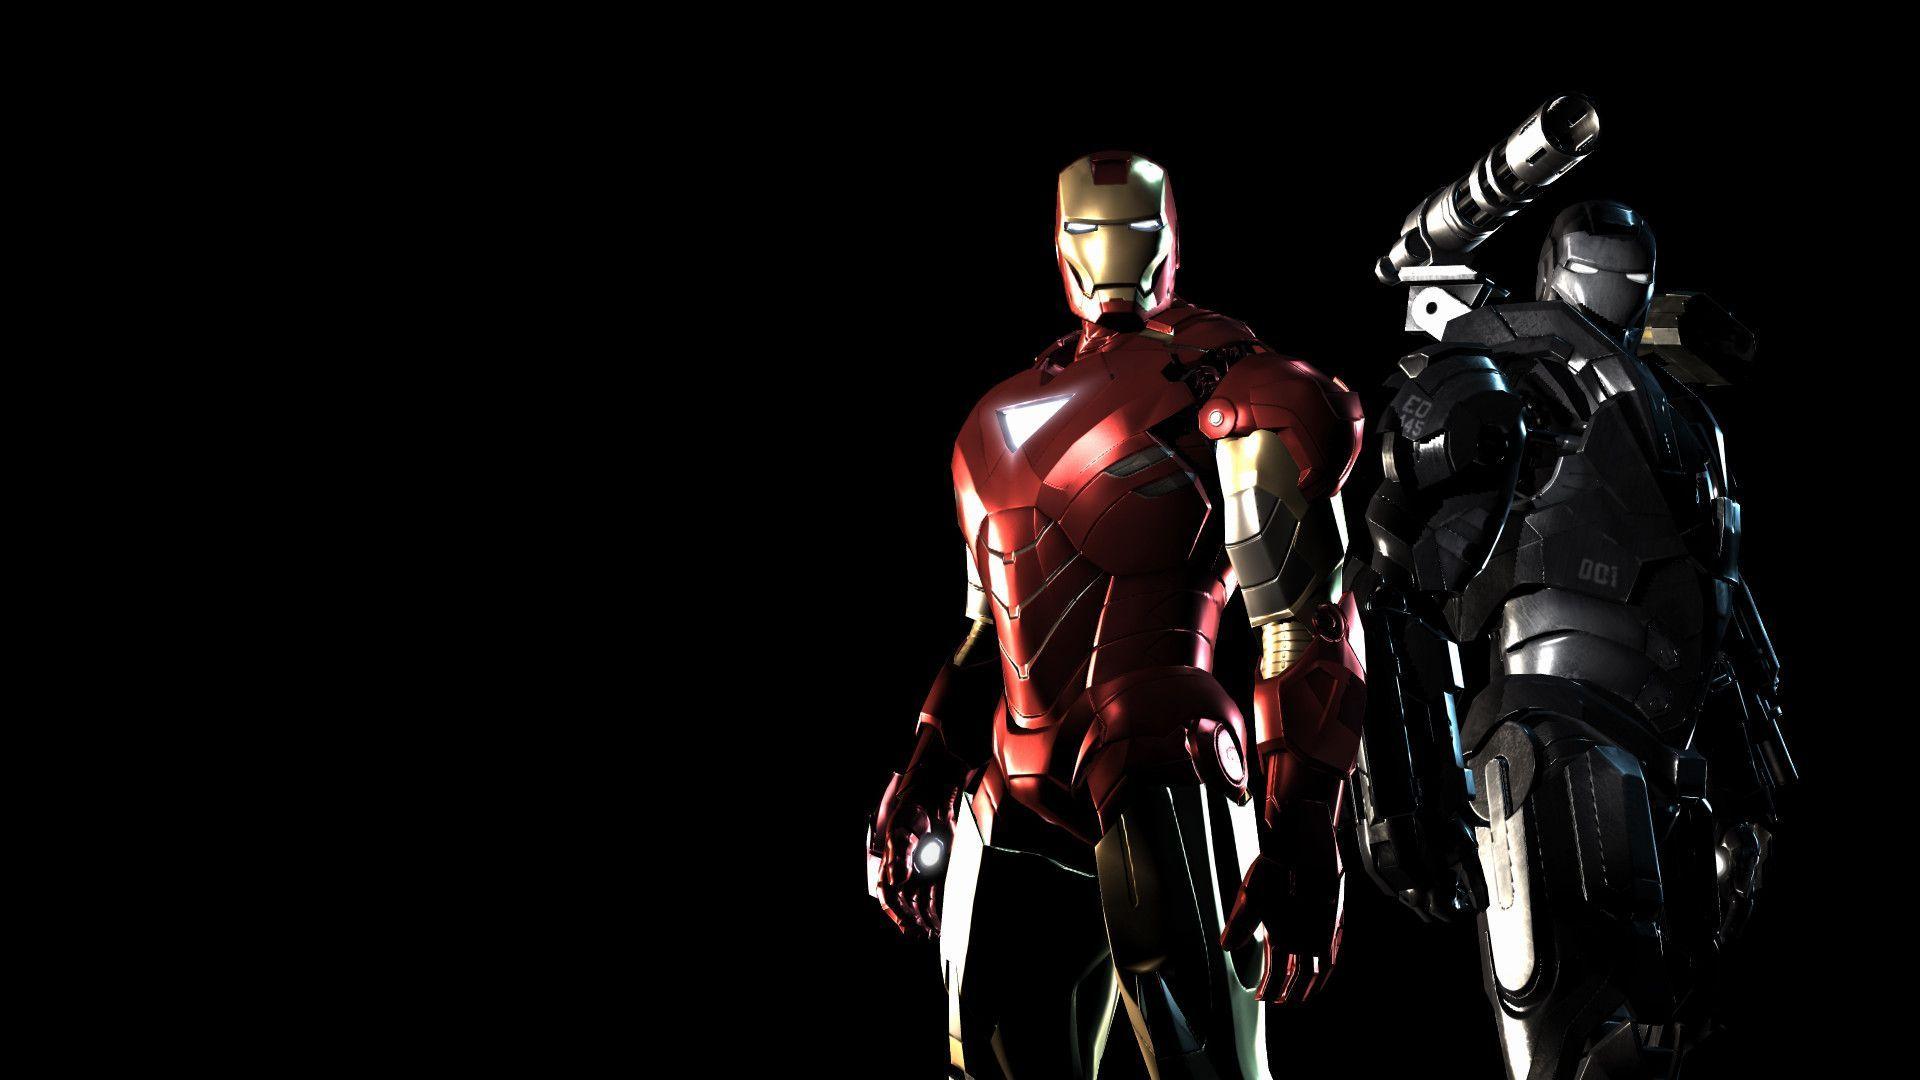 Wallpapers For > Ironman Wallpapers Hd 1080p